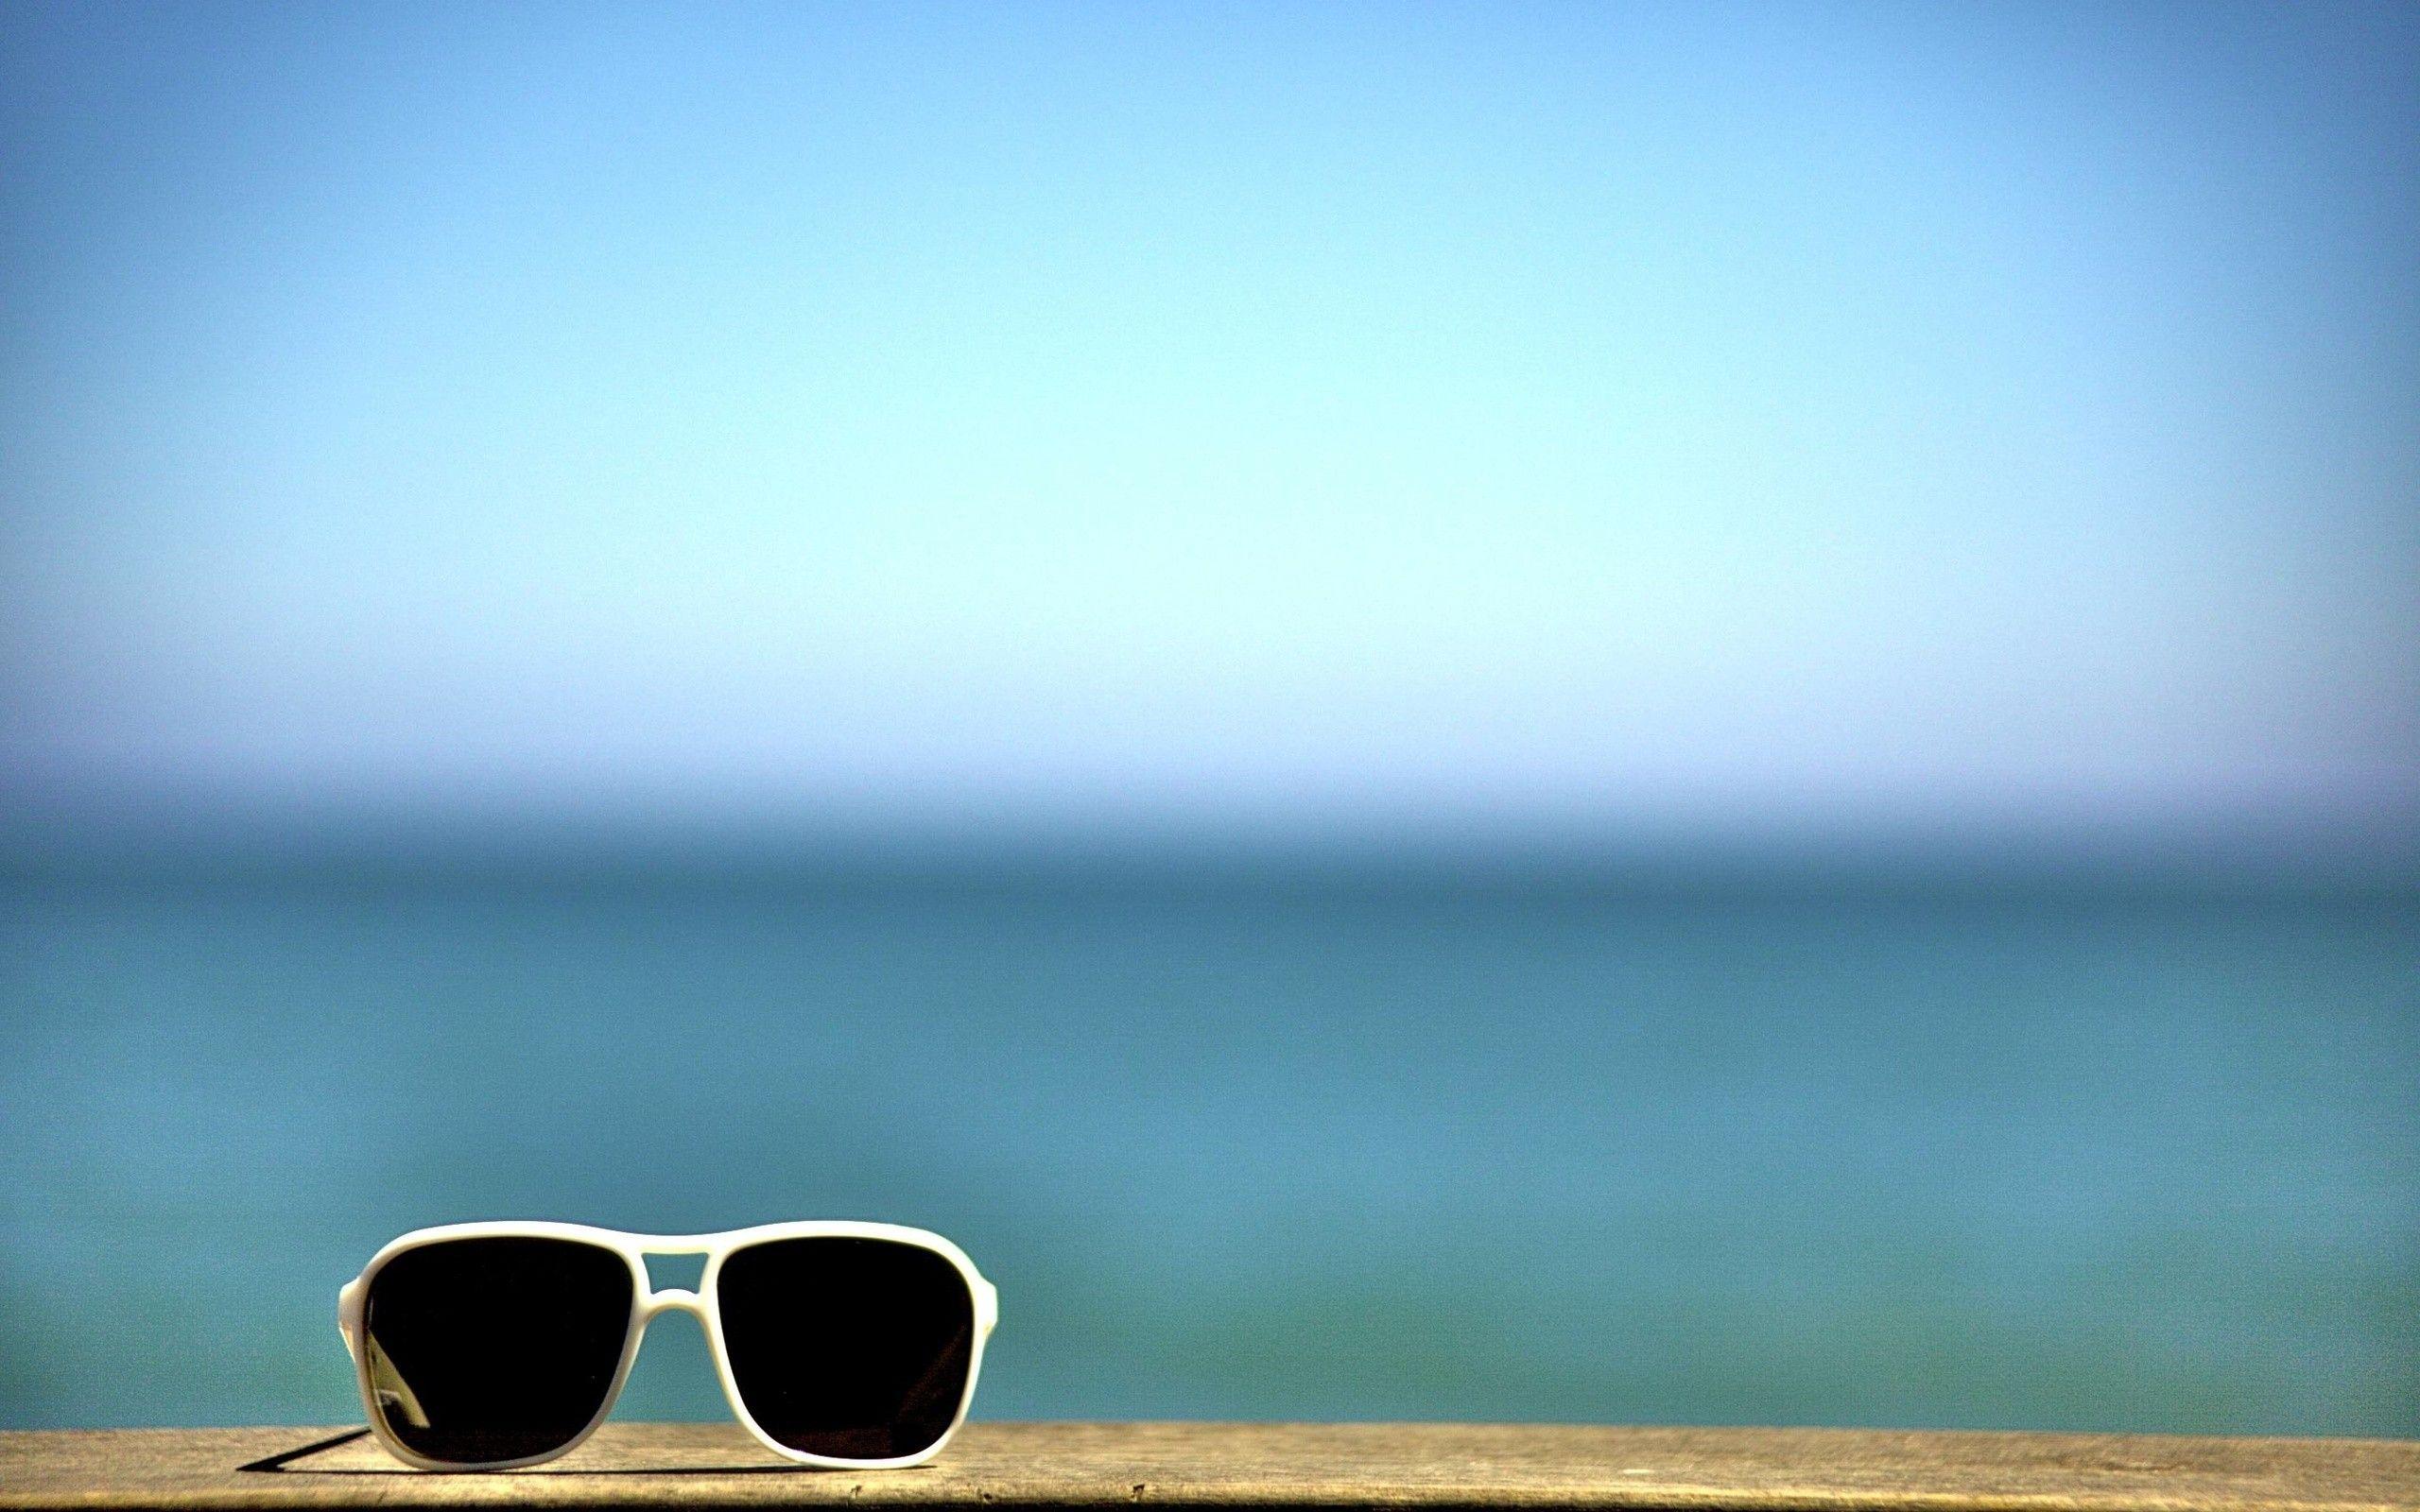 High Quality Sunglasses Wallpaper. Full HD Picture